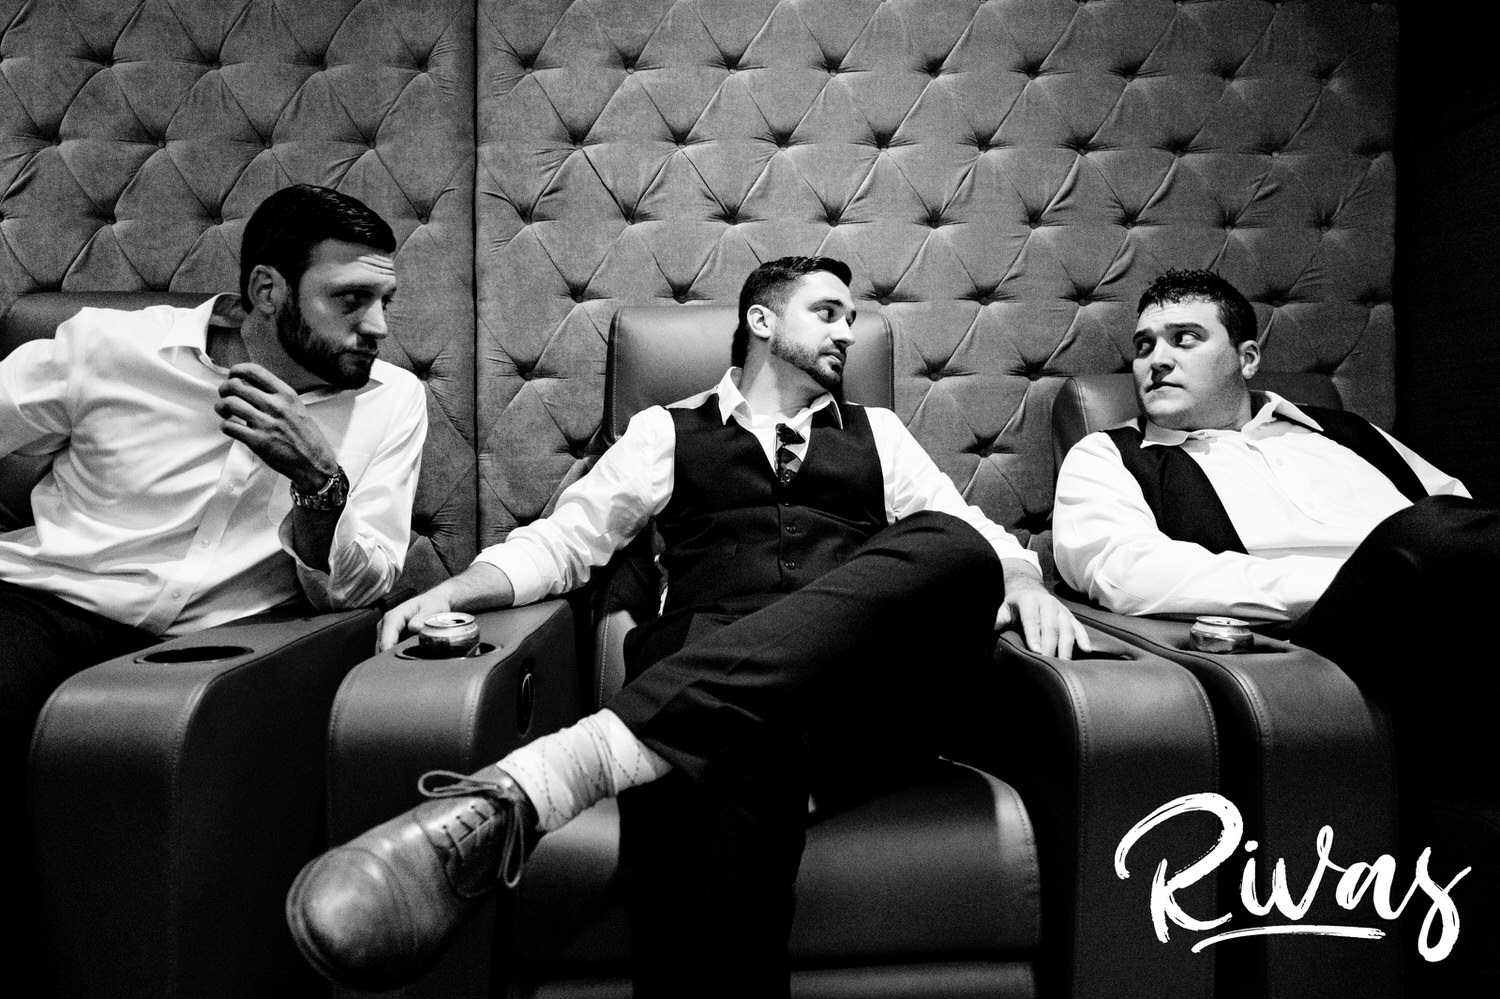 A candid black and white picture of a groom and two groomsmen, sitting in chairs, reclining and making funny faces at each other. 